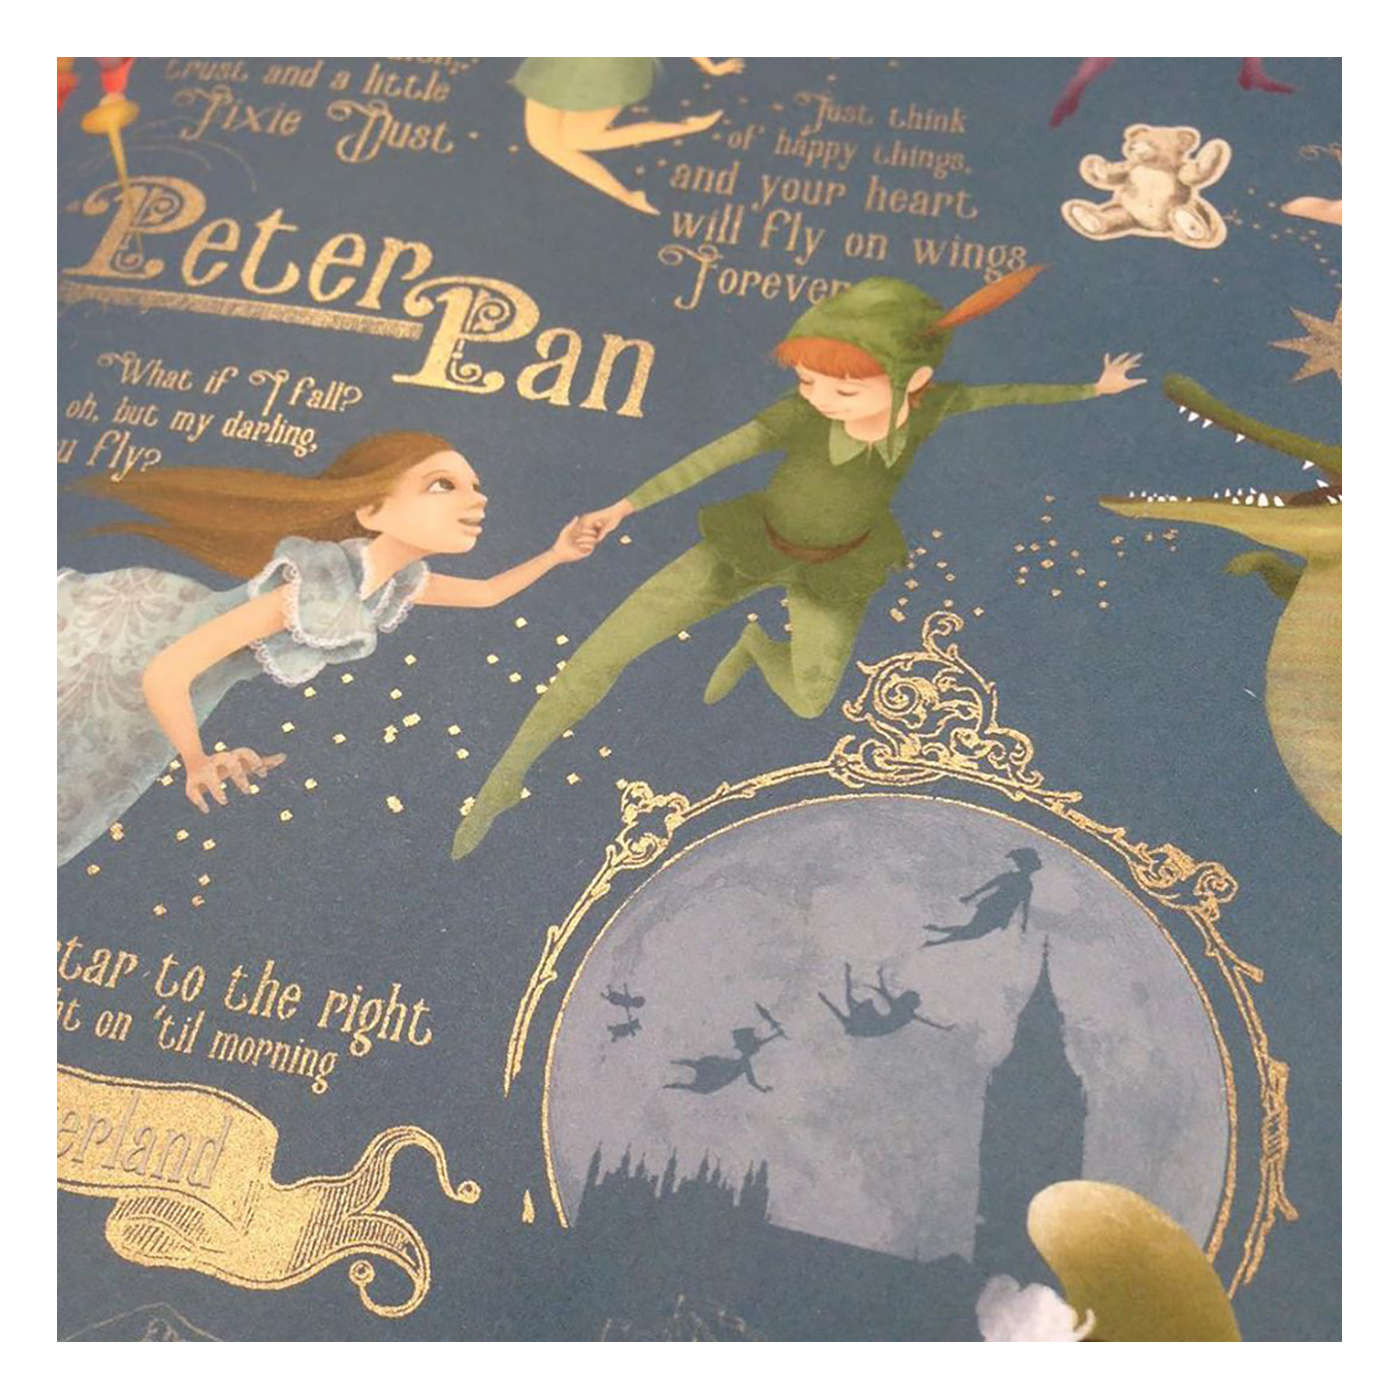 peter pan fairy tale pattern giftwrap Stationery Wrapping paper Tinker Bell hook